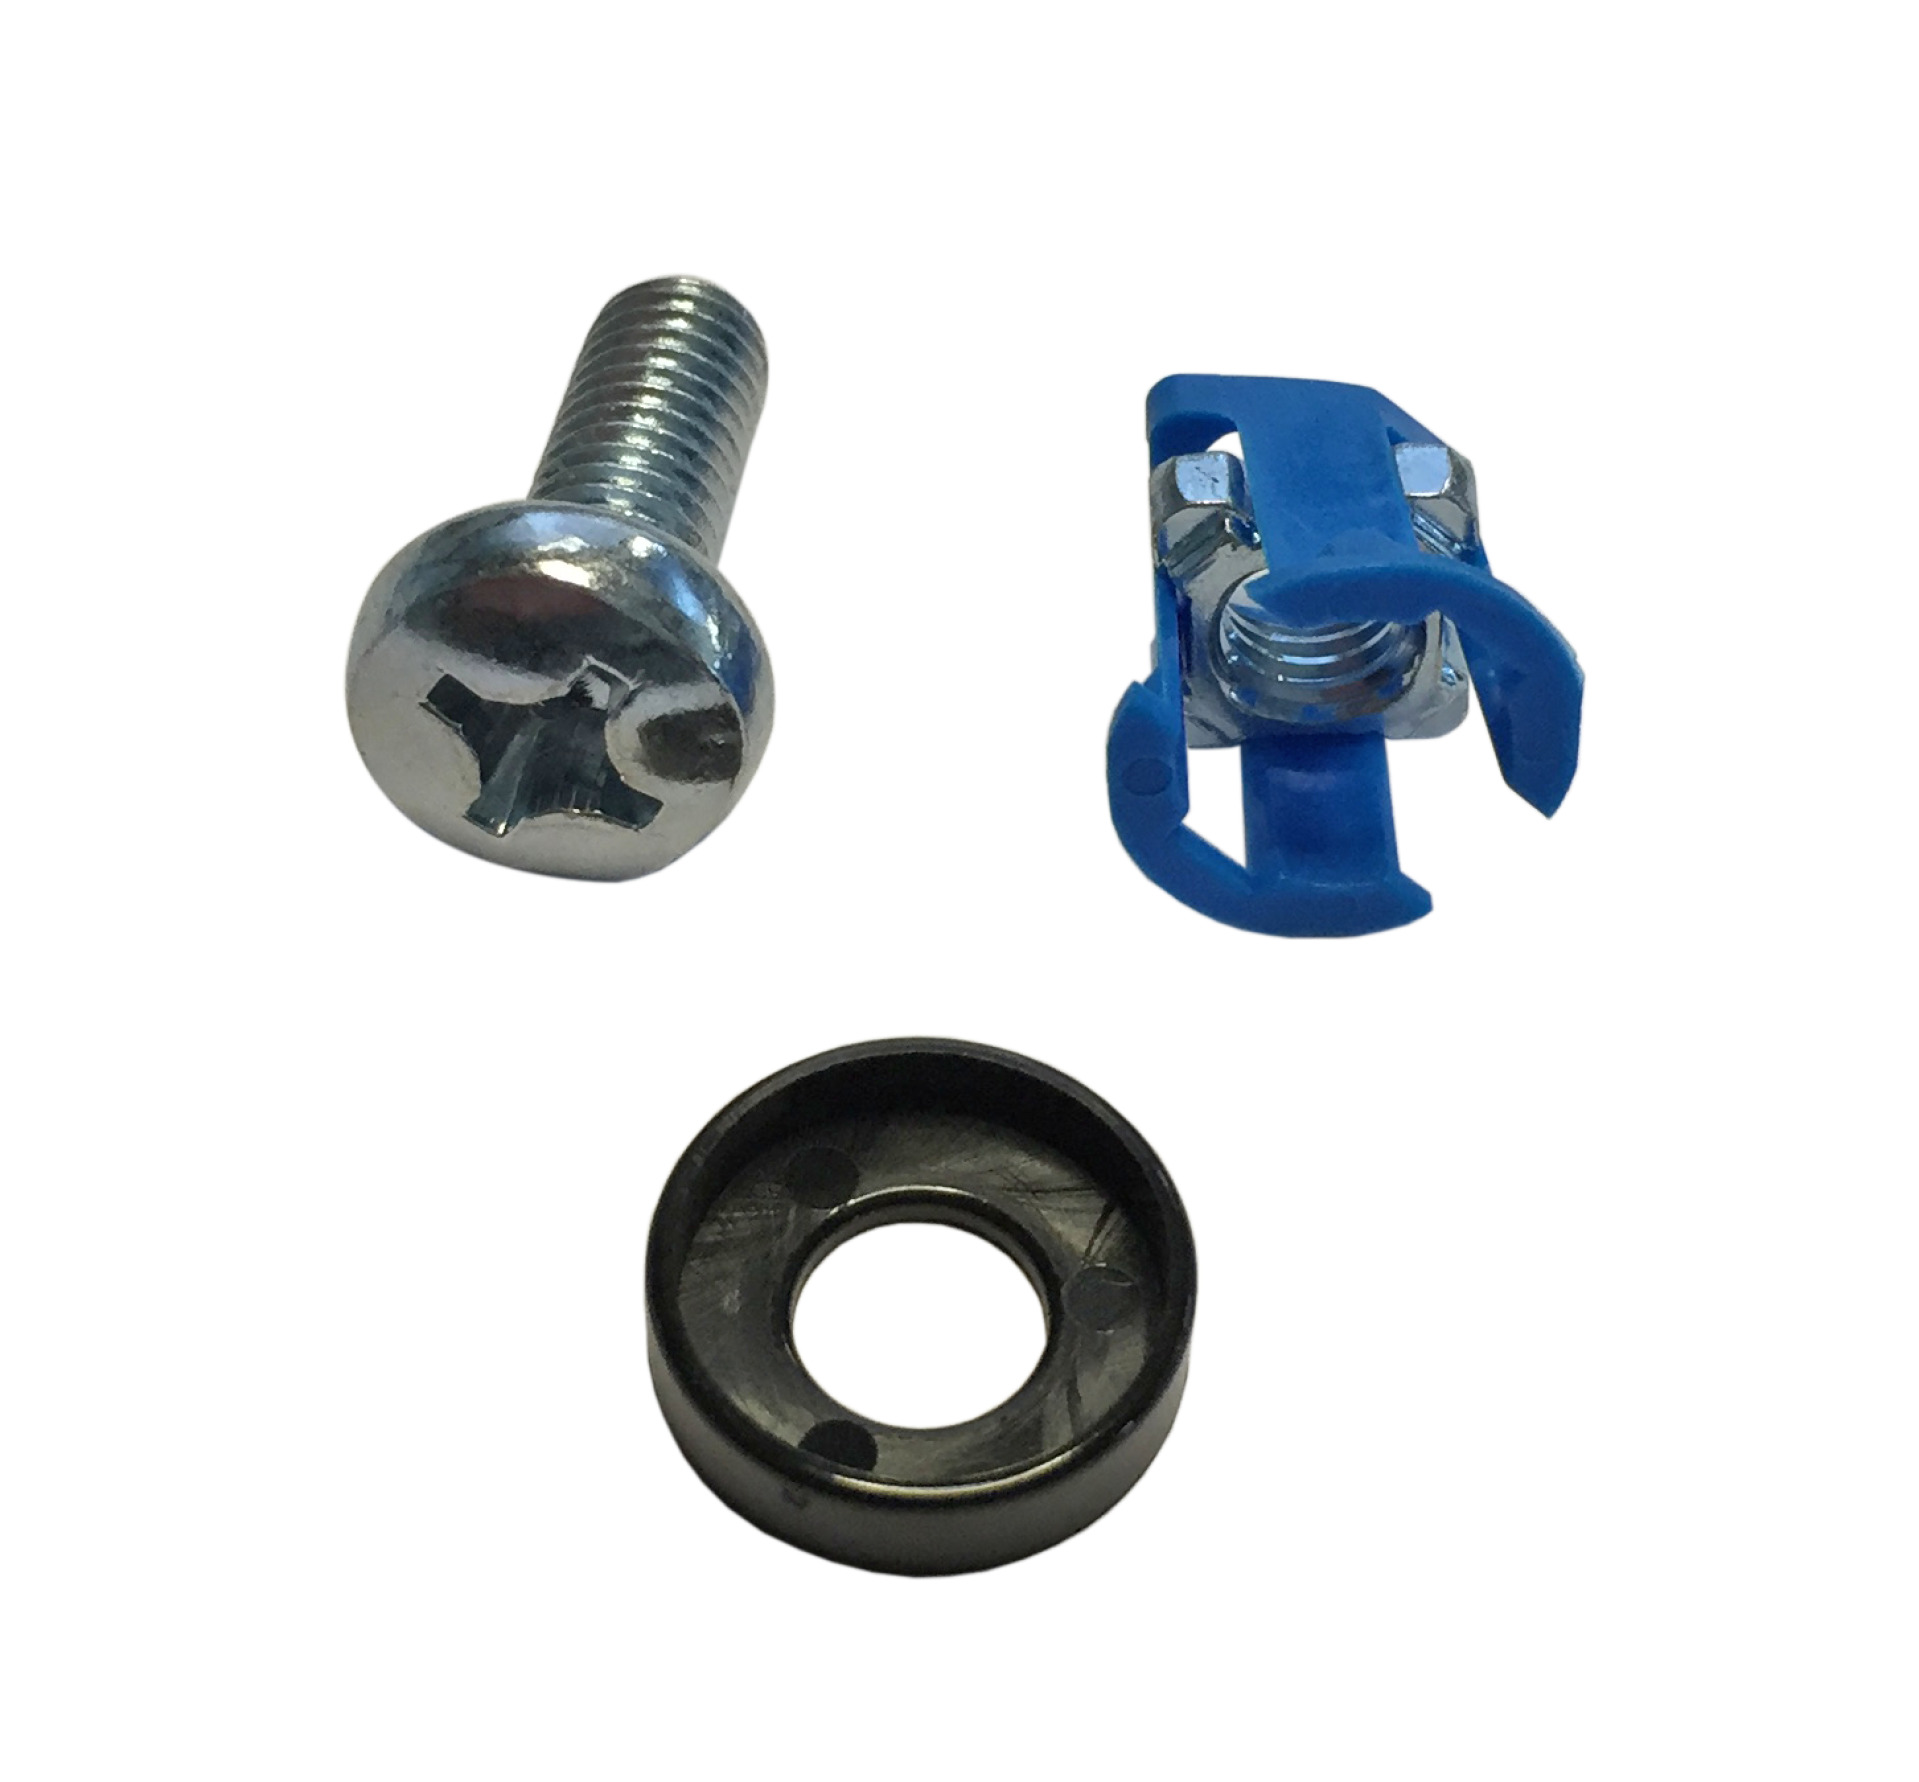 Set of Captive Nuts 50 x M6 for Front Mounting (50 x Nut., Screw, Washer)